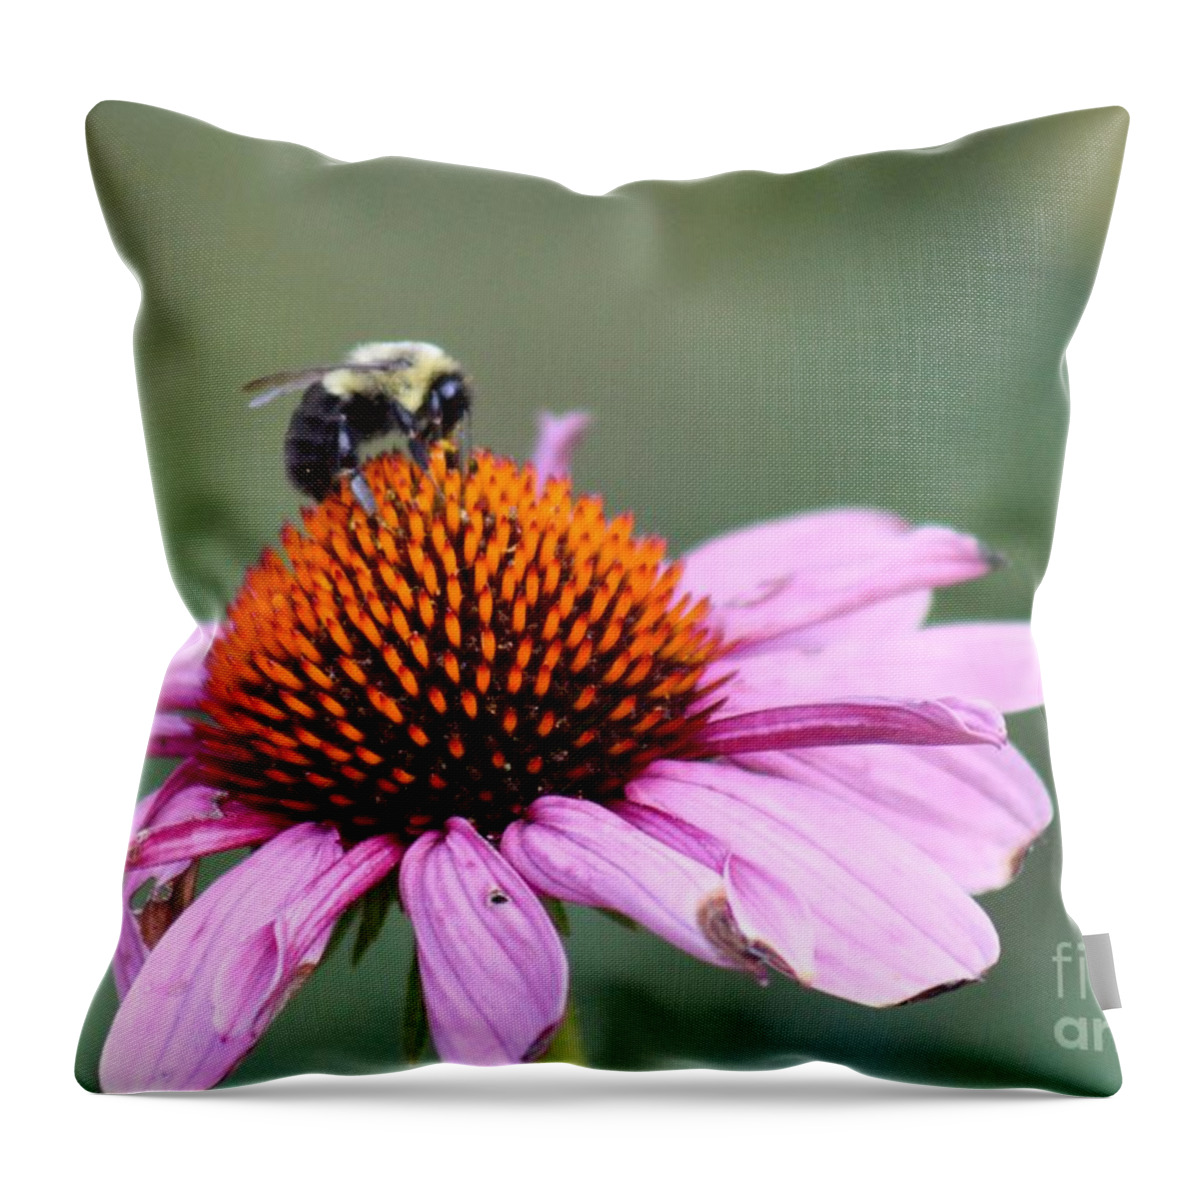 Pink Throw Pillow featuring the photograph Nature's Beauty 72 by Deena Withycombe